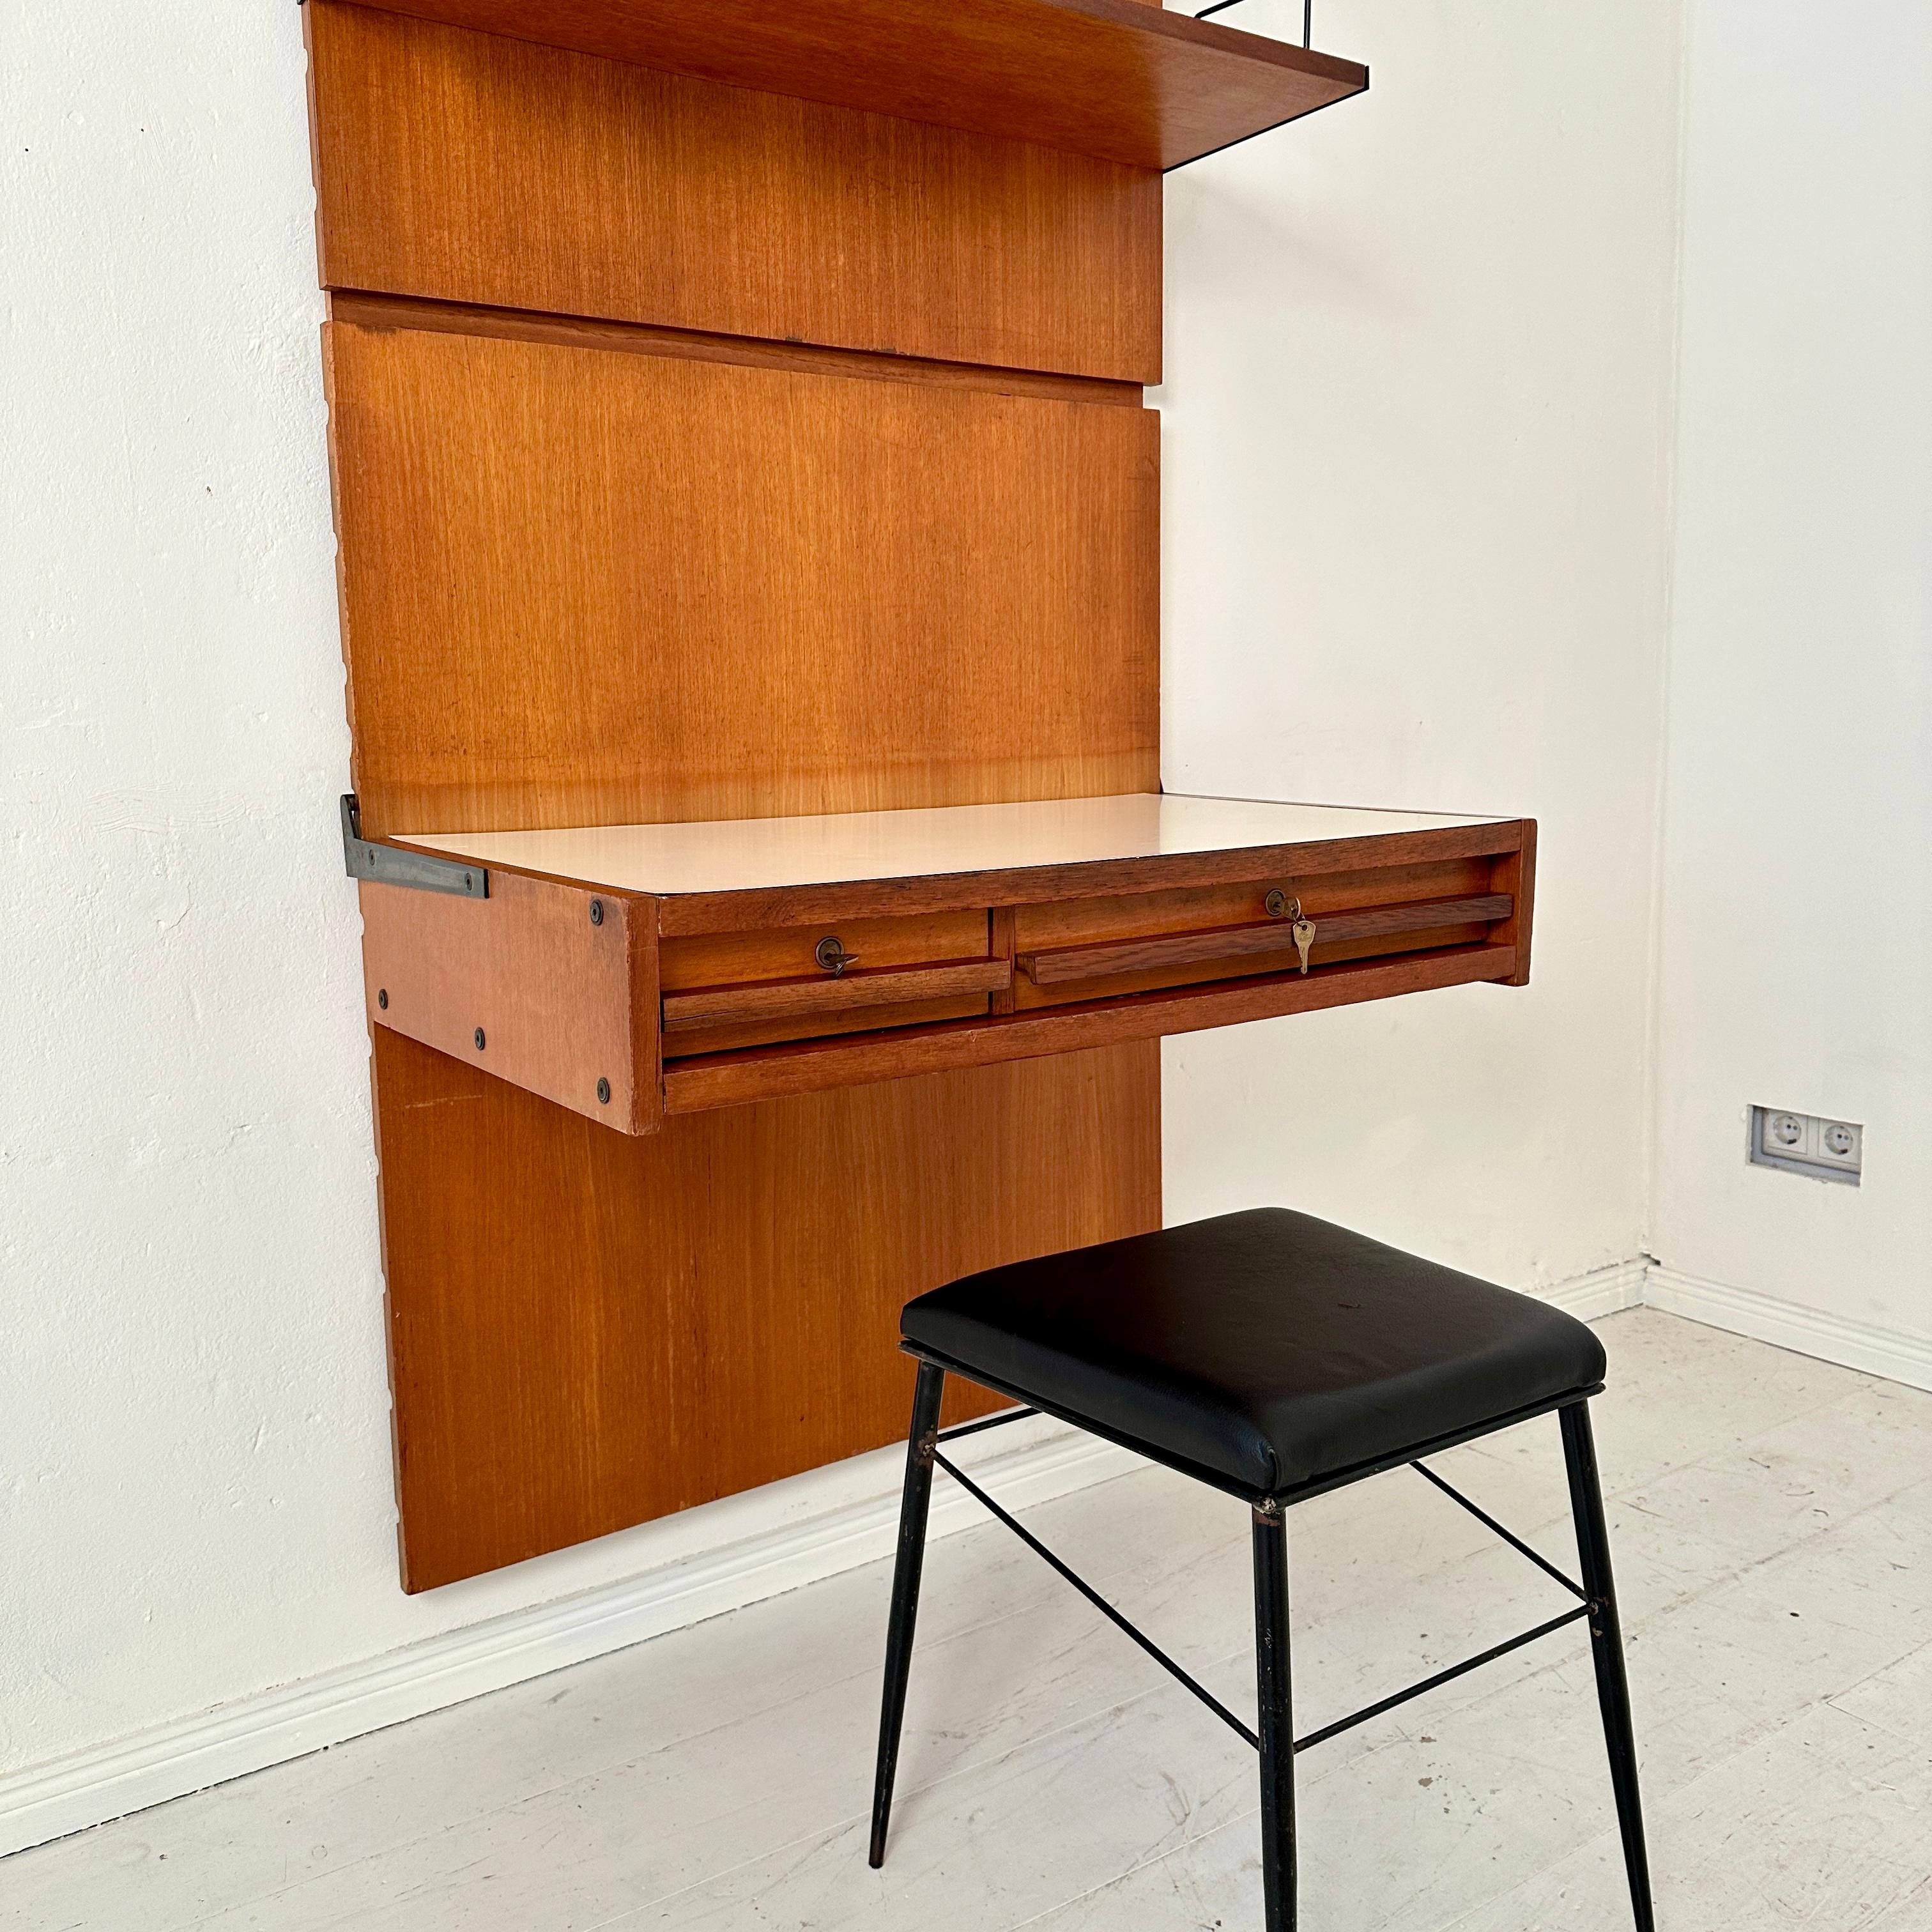 Mid Century Italian Wall Desk in Brown Teak with Panels and Shelfs, around 1960 For Sale 3